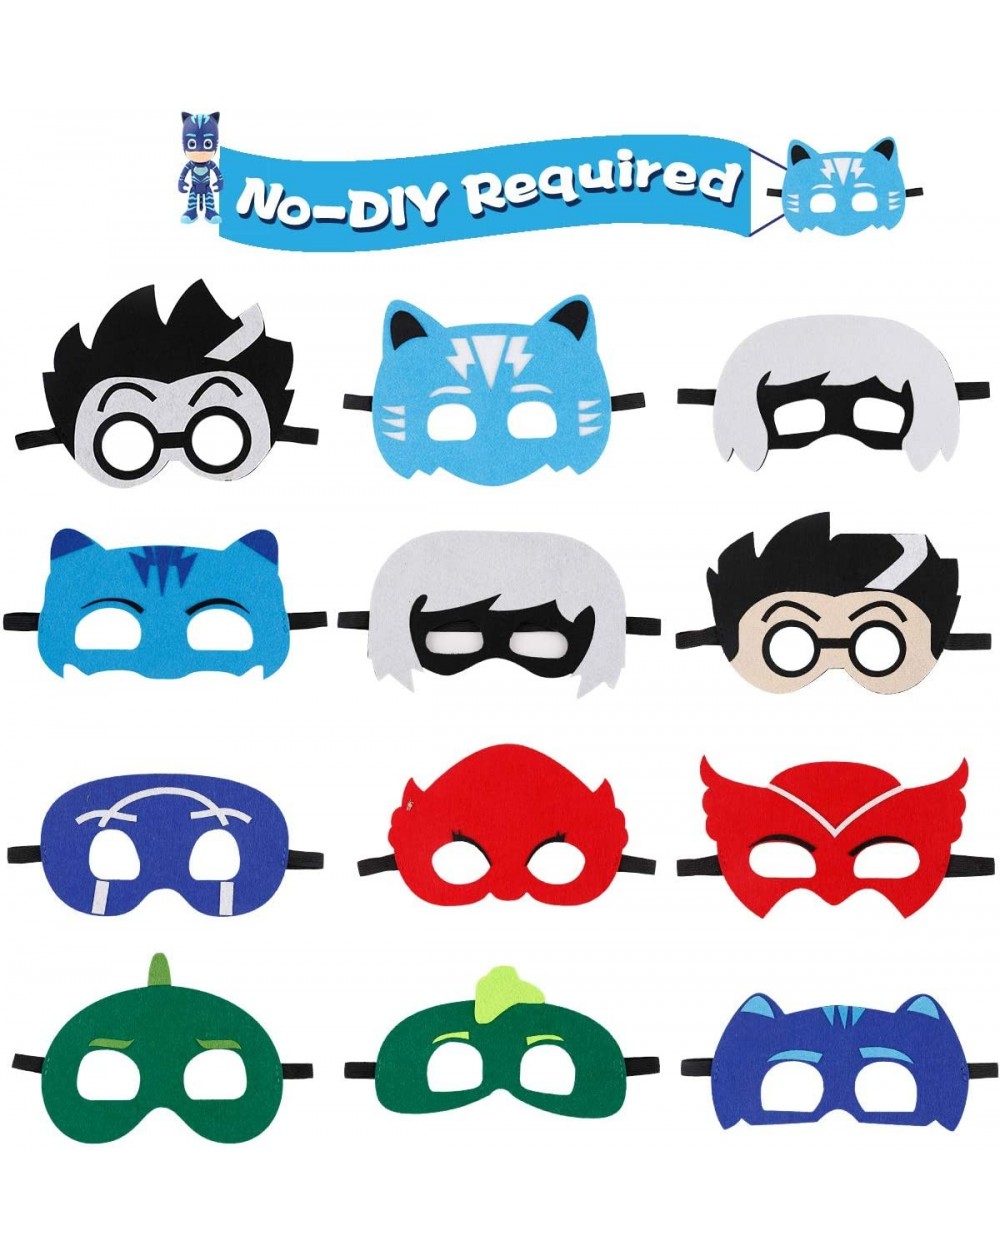 Party Favors PJ Party Favors Gifts Supplies for Kids- 16 Packs Felt and Elastic Masks- Birthday Party Masquerade Decorations ...